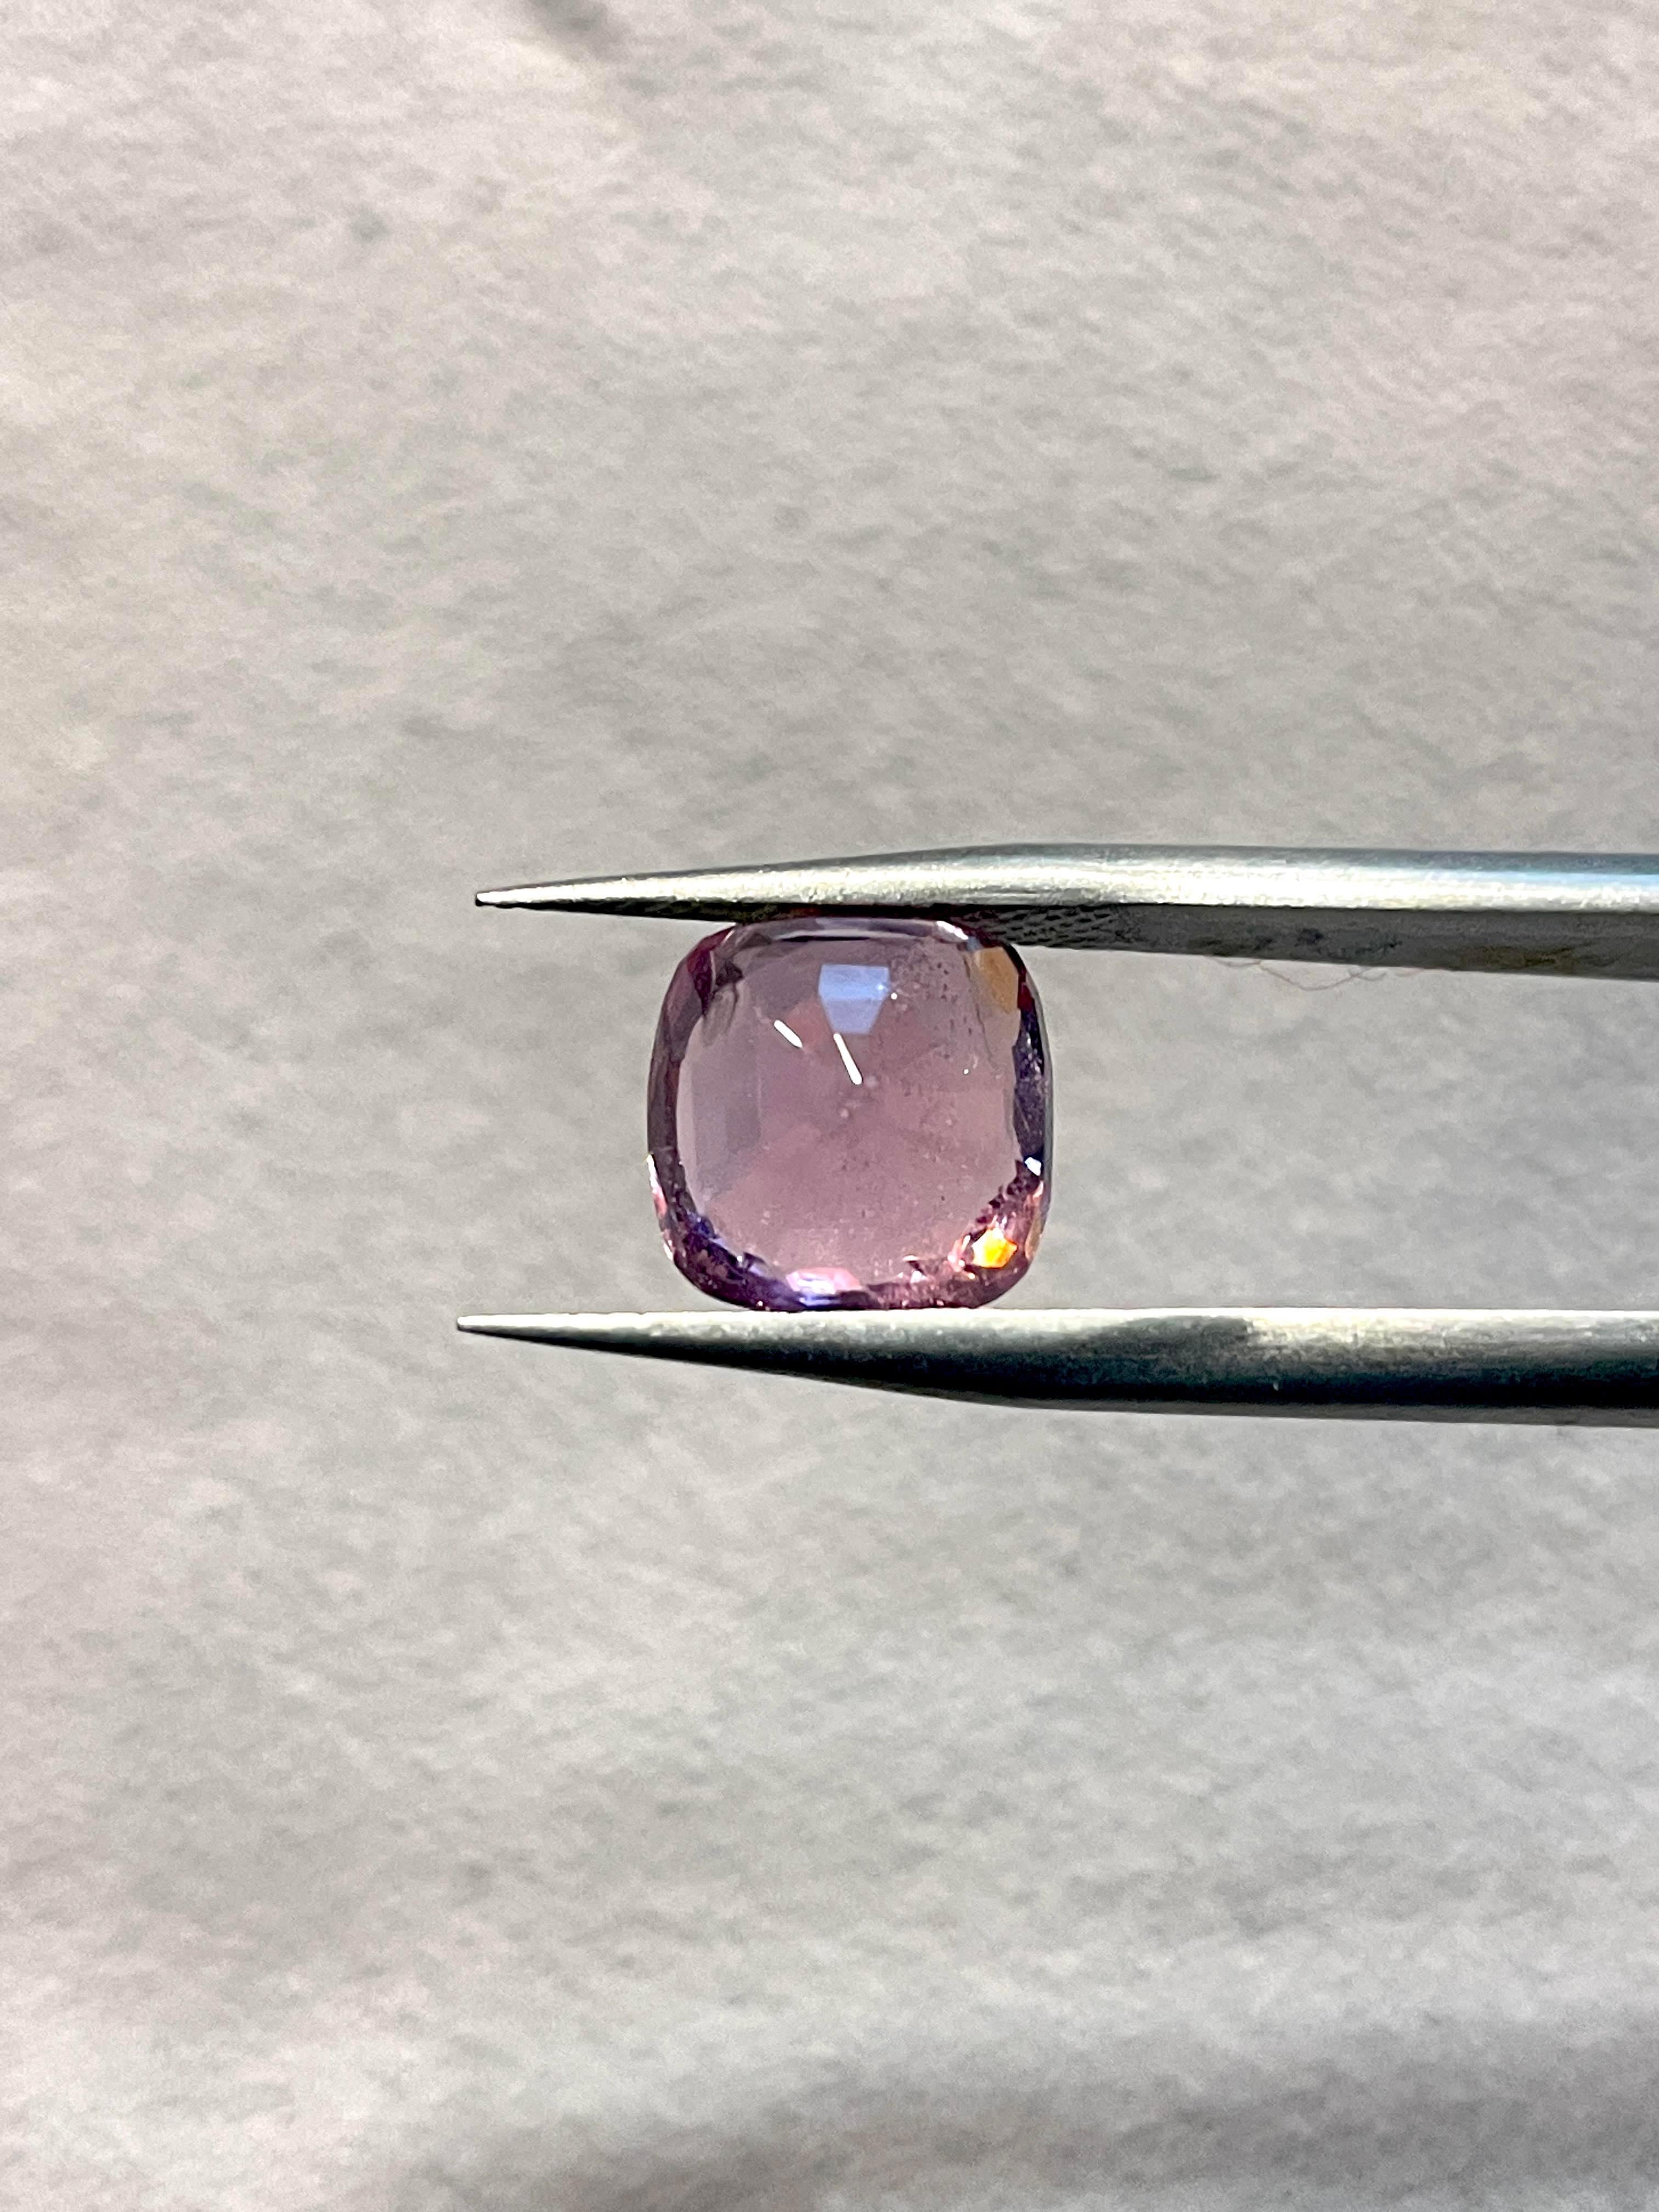 This gem comes from the famous Burma origin, the weight is over 3 carats 3.78 carats to be exact, it has a distinct saturation of pink color ,what makes this gem even better is that it has a high clarity with great amount of noticeable Lustre,